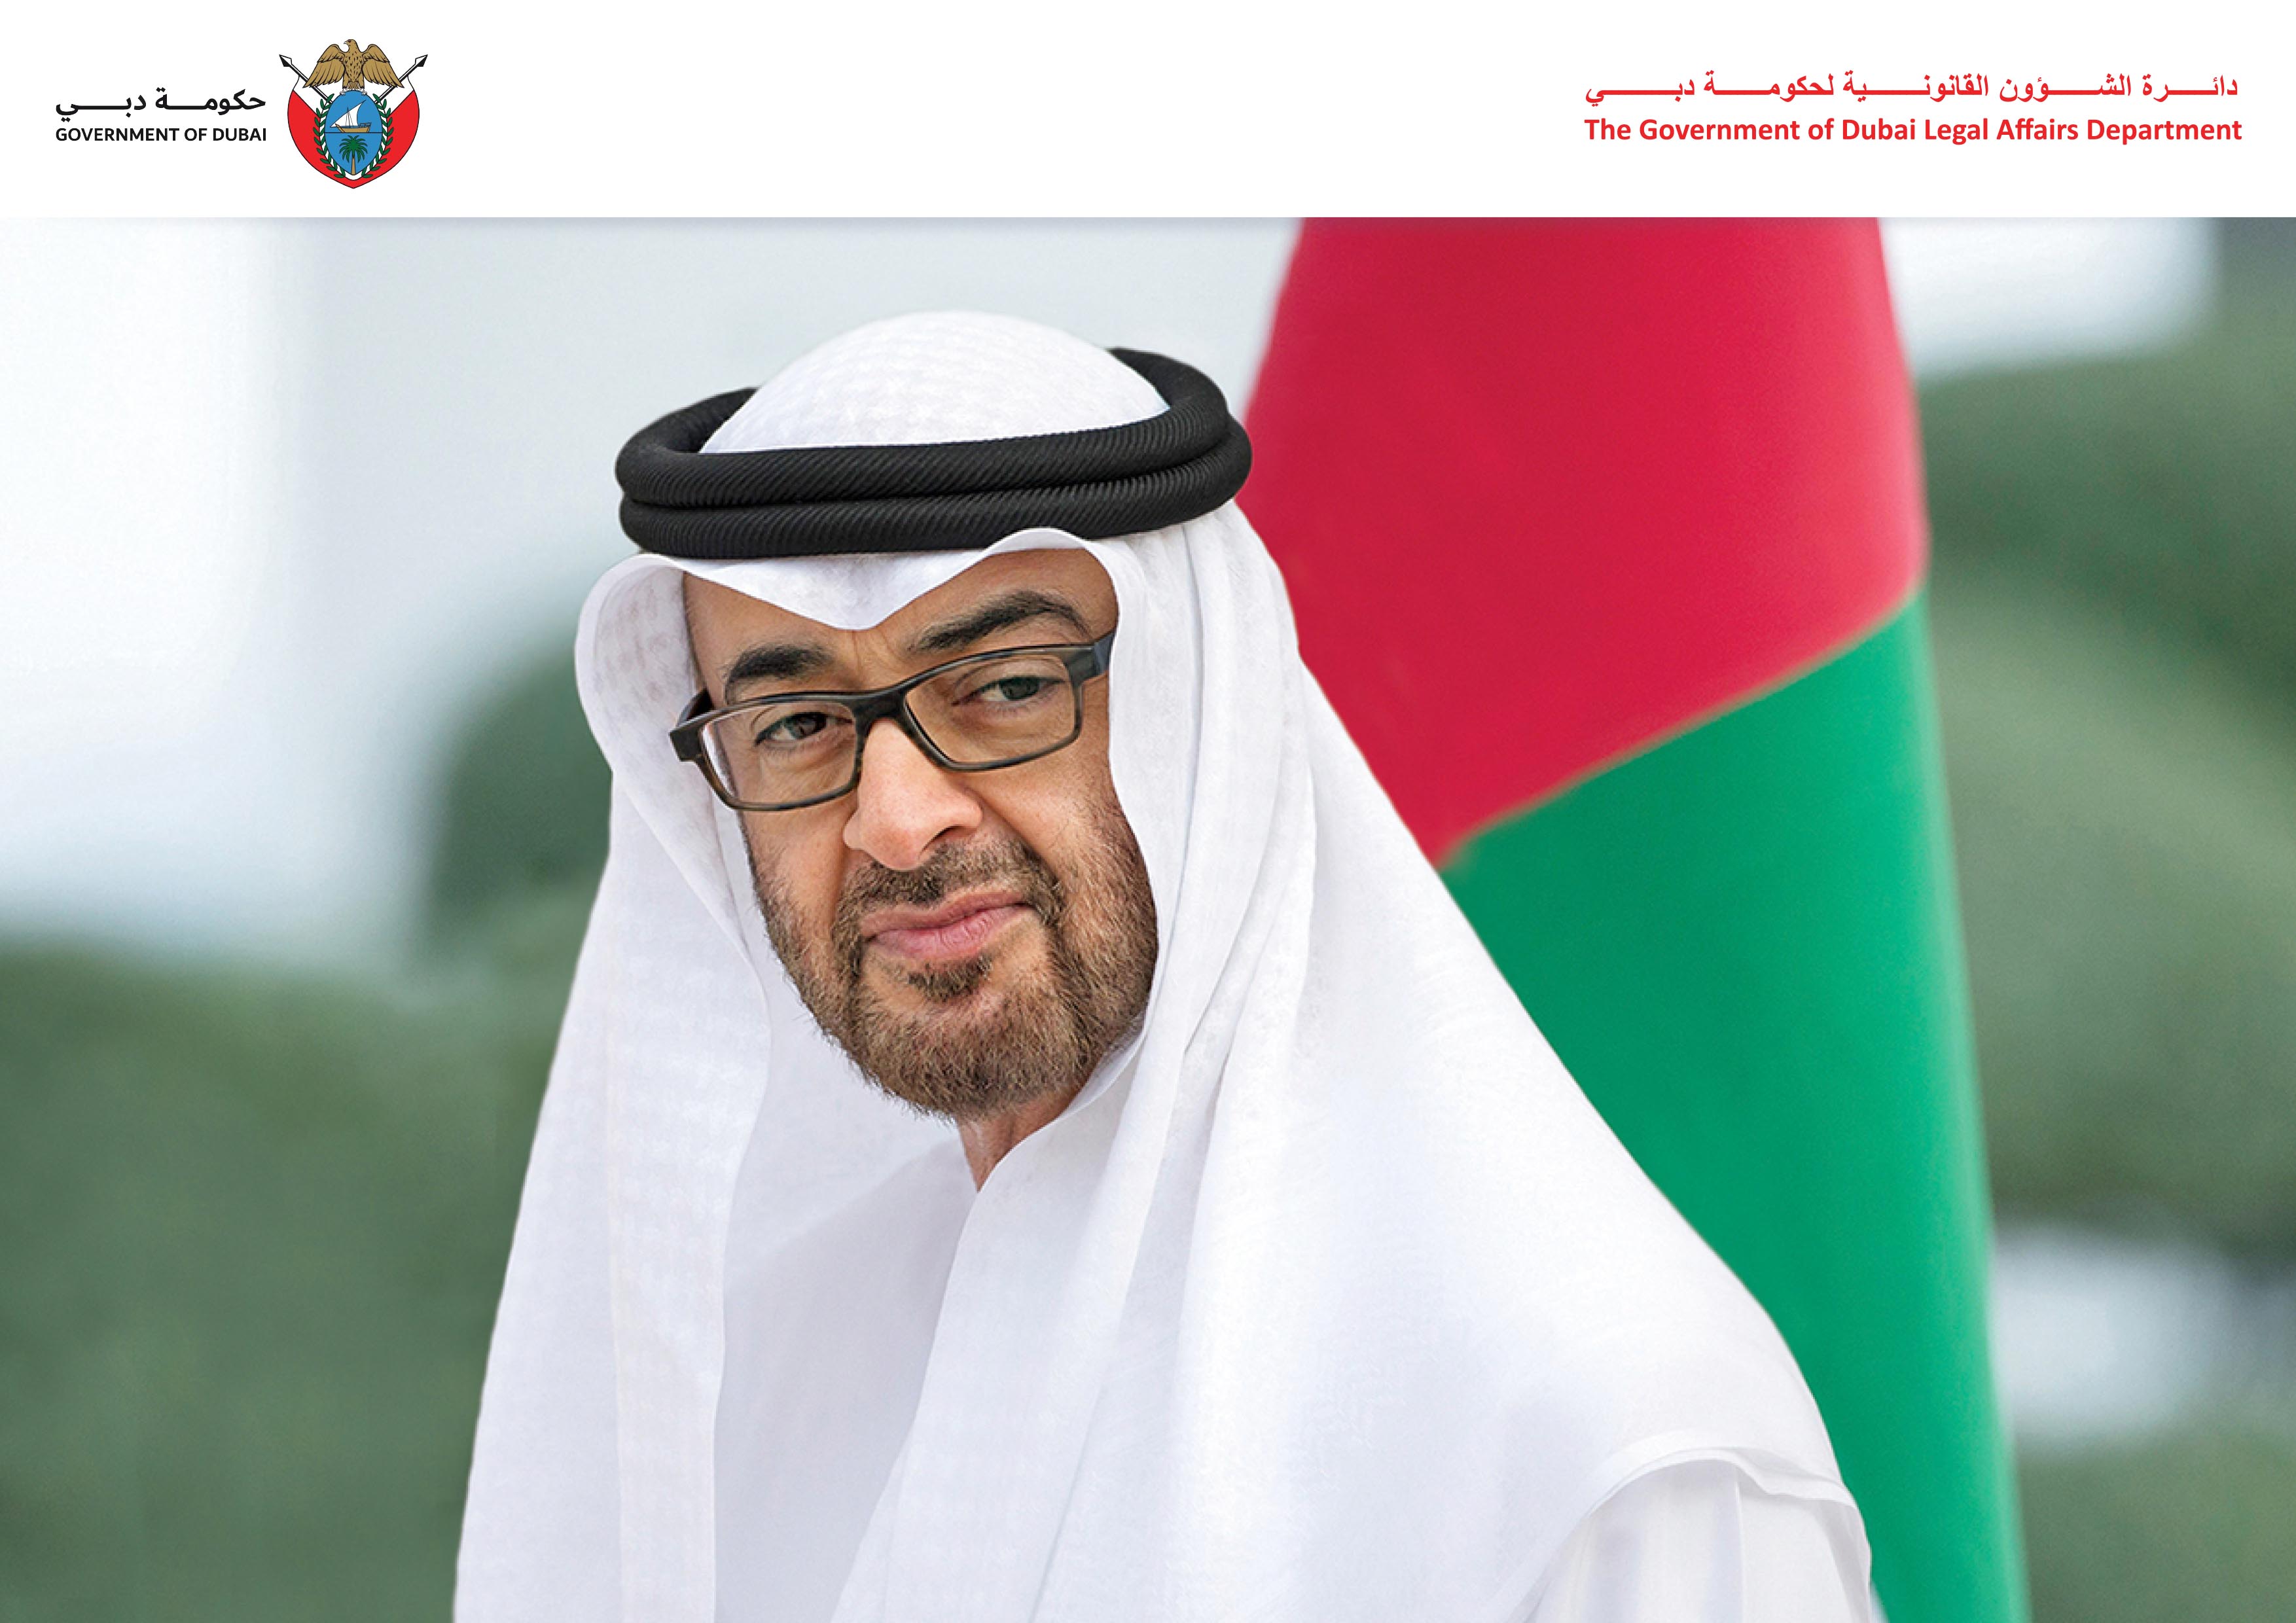 Statement by His Excellency the Director General of the Government of Dubai Legal Affairs Department on the Occasion of His Highness the President of the UAE’s Declaration of 18 July as “Union Pledge Day” in the UAE